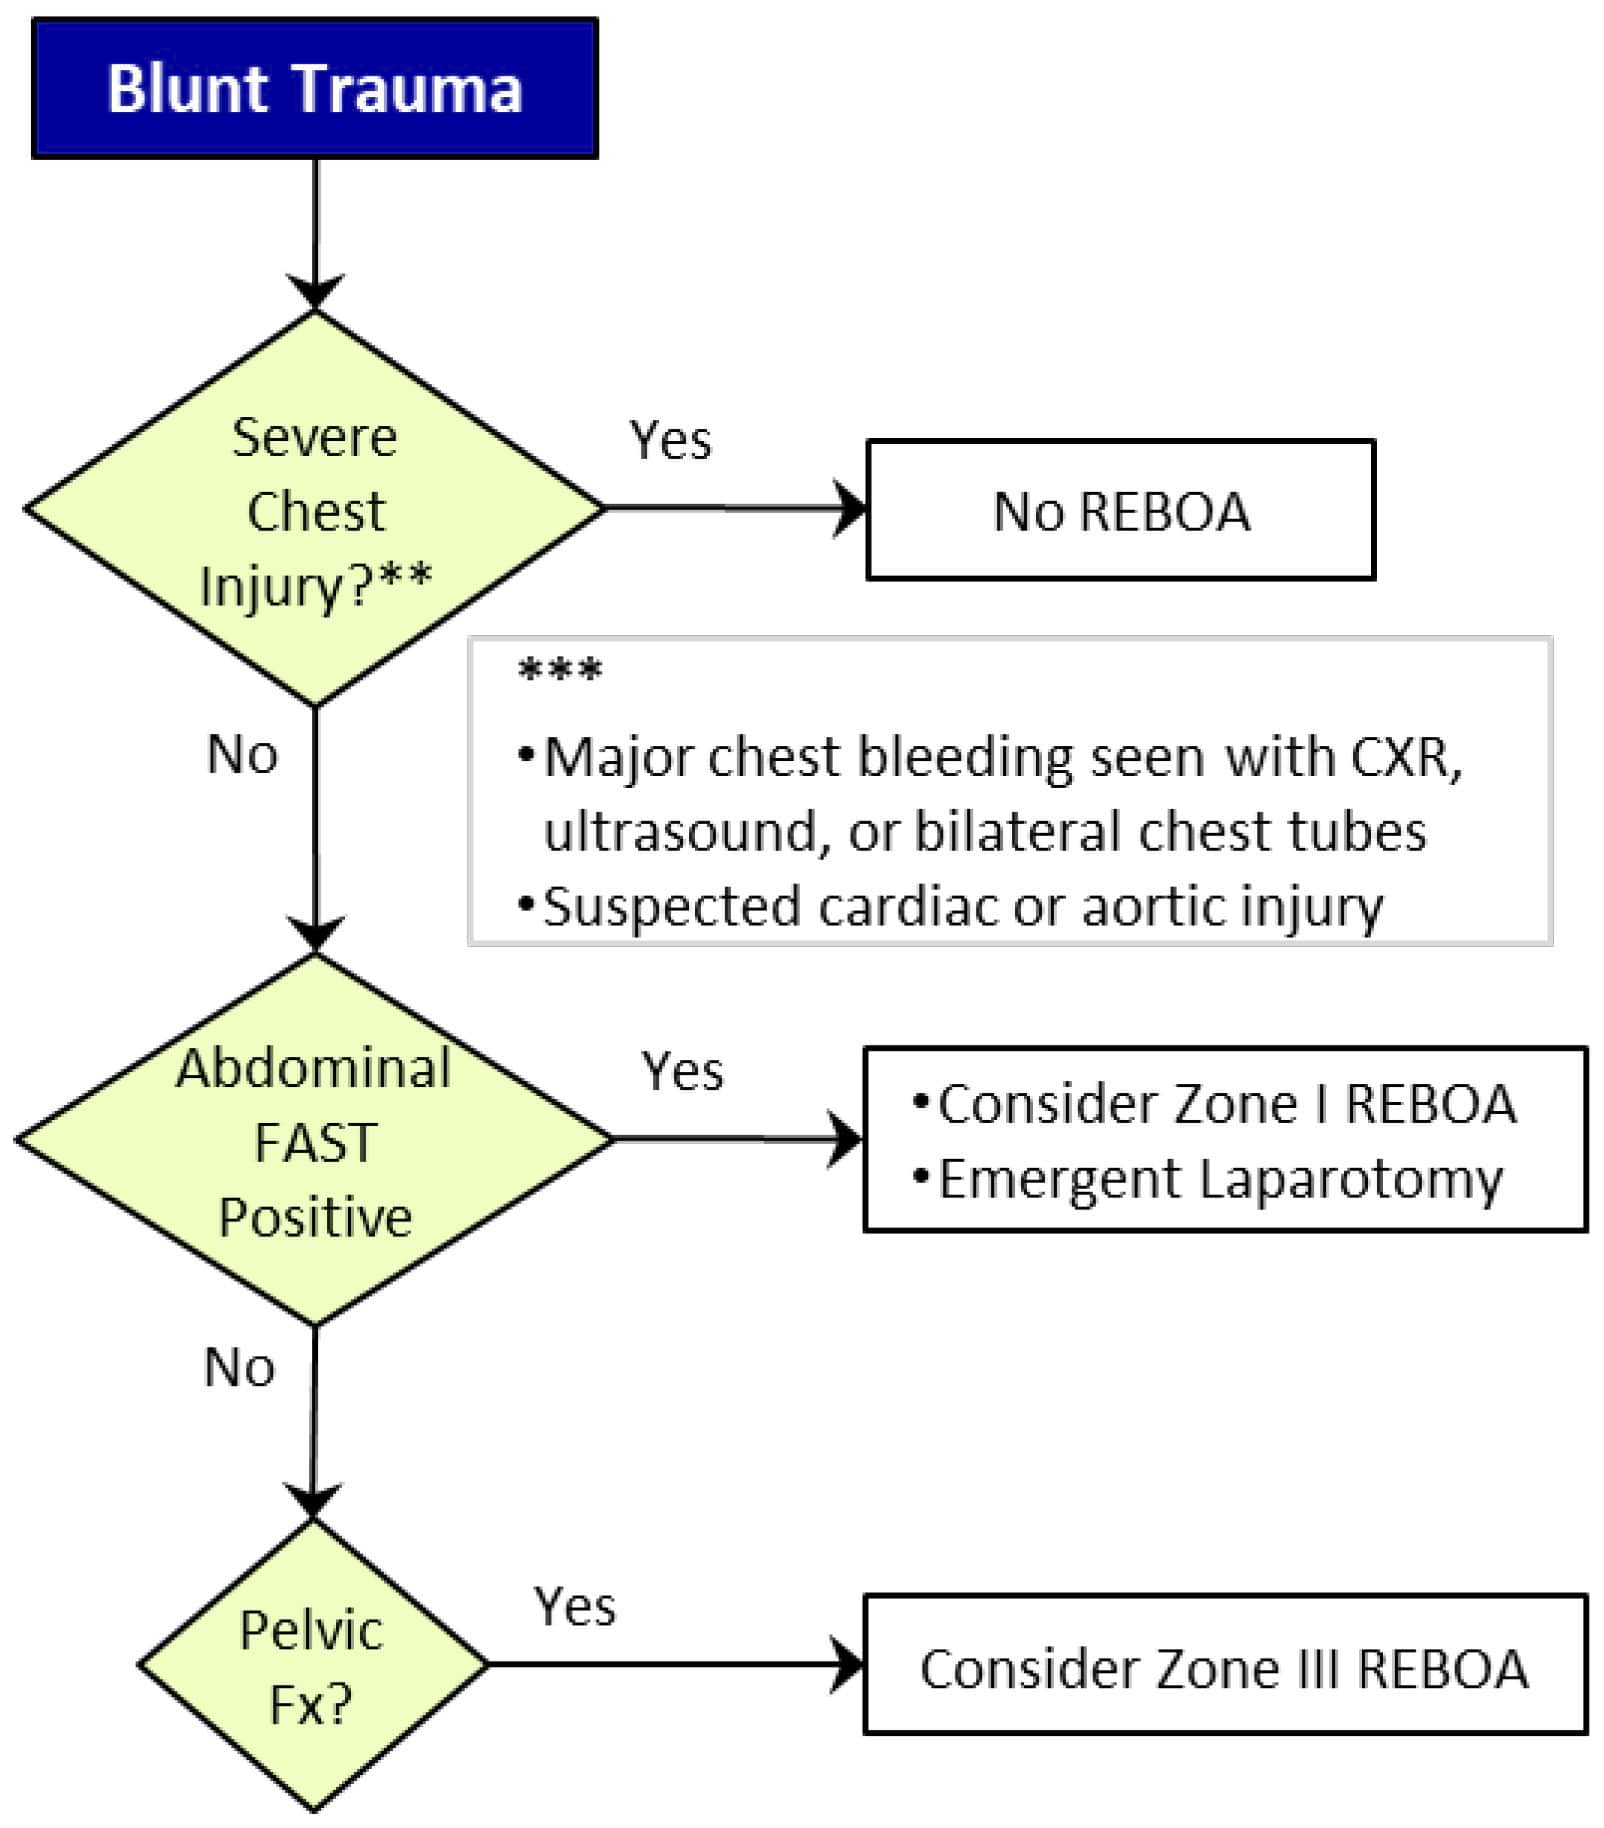 Algorithm For The Use of REBOA For Profound Shock: Blunt Trauma